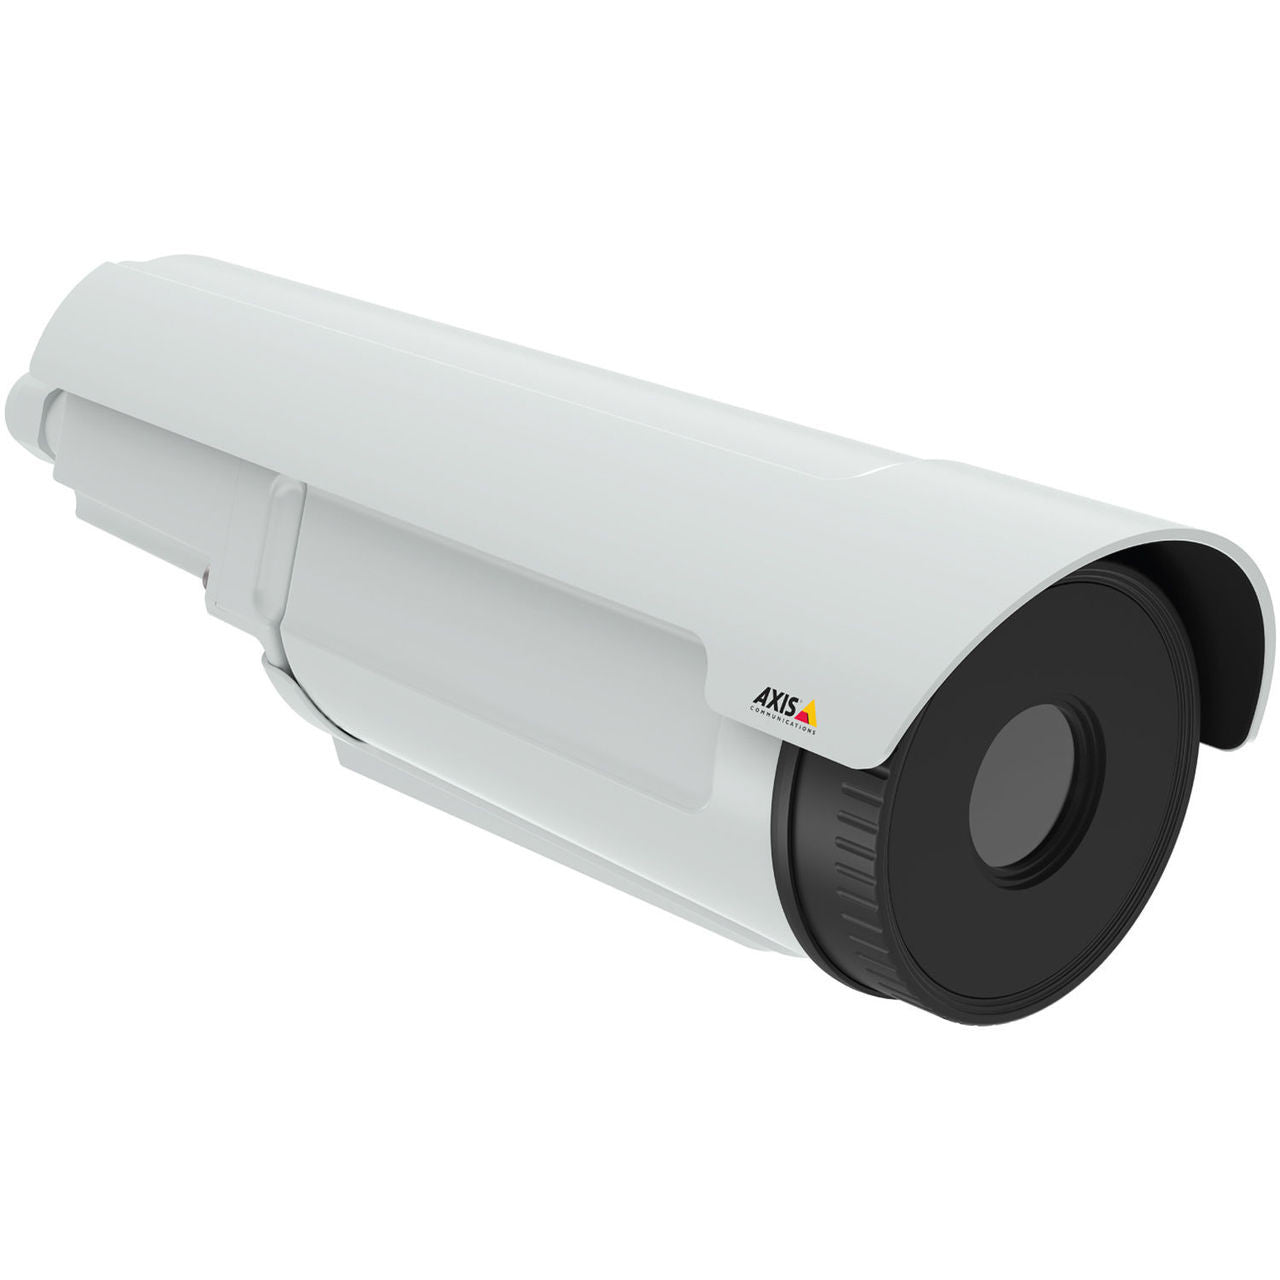 AXIS Q1942-E PT Mount (0985-001) 35mm 30fps Thermal Network Camera